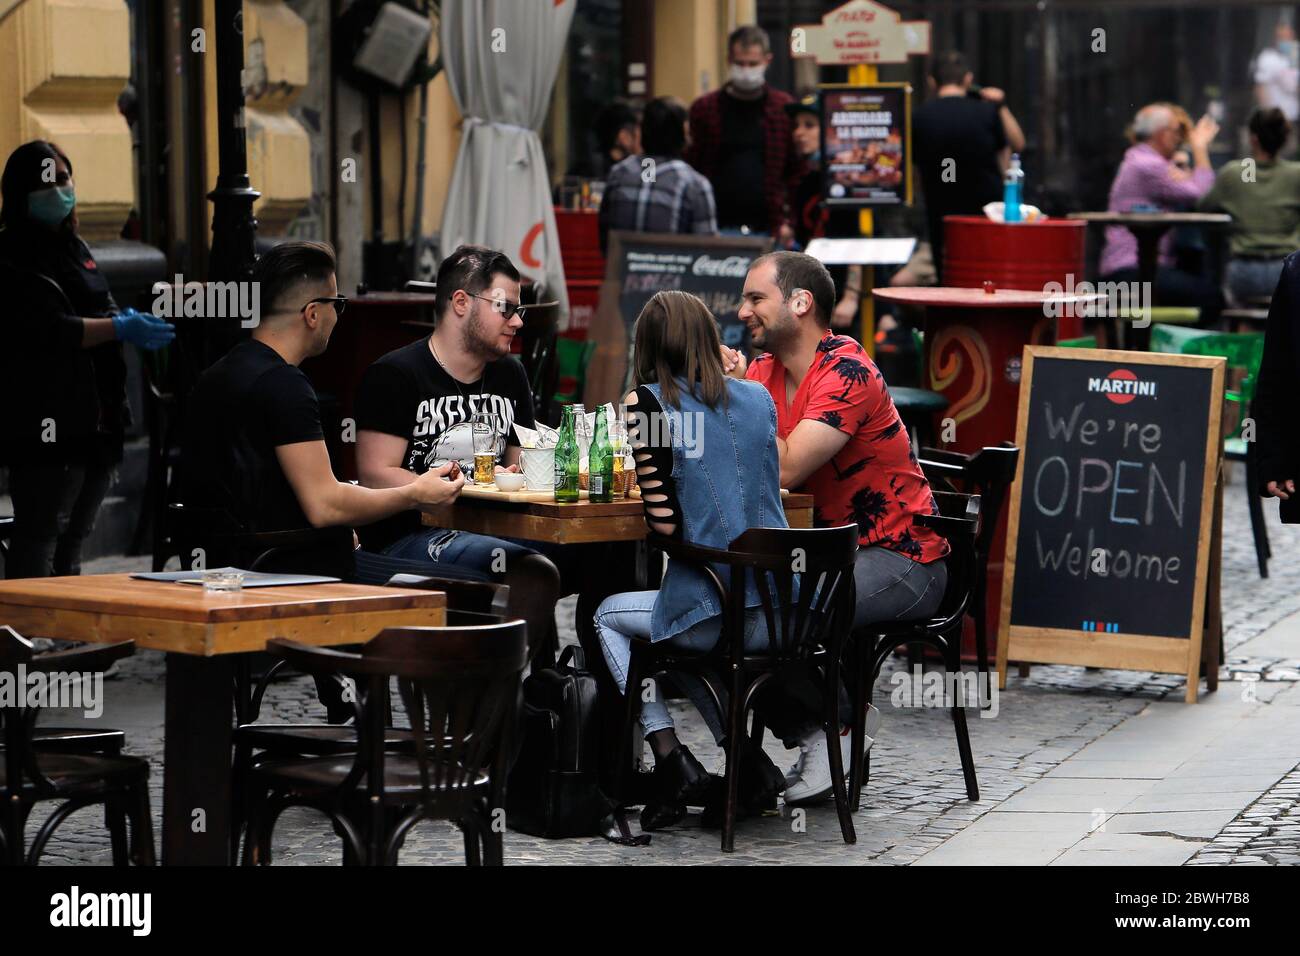 Bucharest, Romania. 1st June, 2020. People enjoy drinks on the reopened terrace of a restaurant in Bucharest, Romania, on June 1, 2020. Romania adopted new relaxation measures from June 1, including reopening open-air terraces of restaurants and beaches, lifting the travel restrictions for residents, as well as allowing outdoor shows and sports events. Credit: Cristian Cristel/Xinhua/Alamy Live News Stock Photo